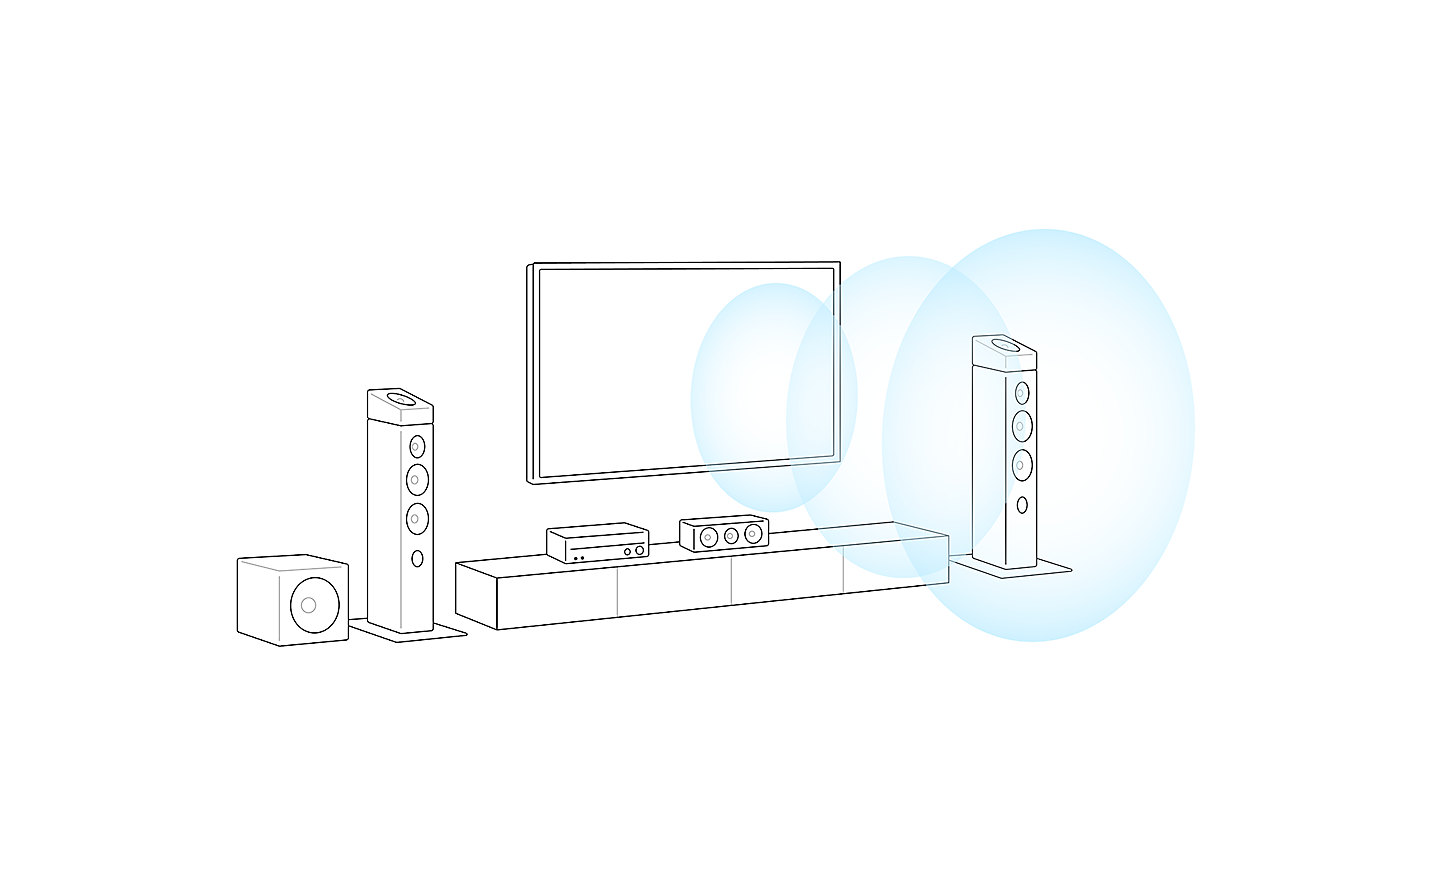 Outline only image of a TV setup. 3 blue circles are coming out of the center of the TV representing the sound direction